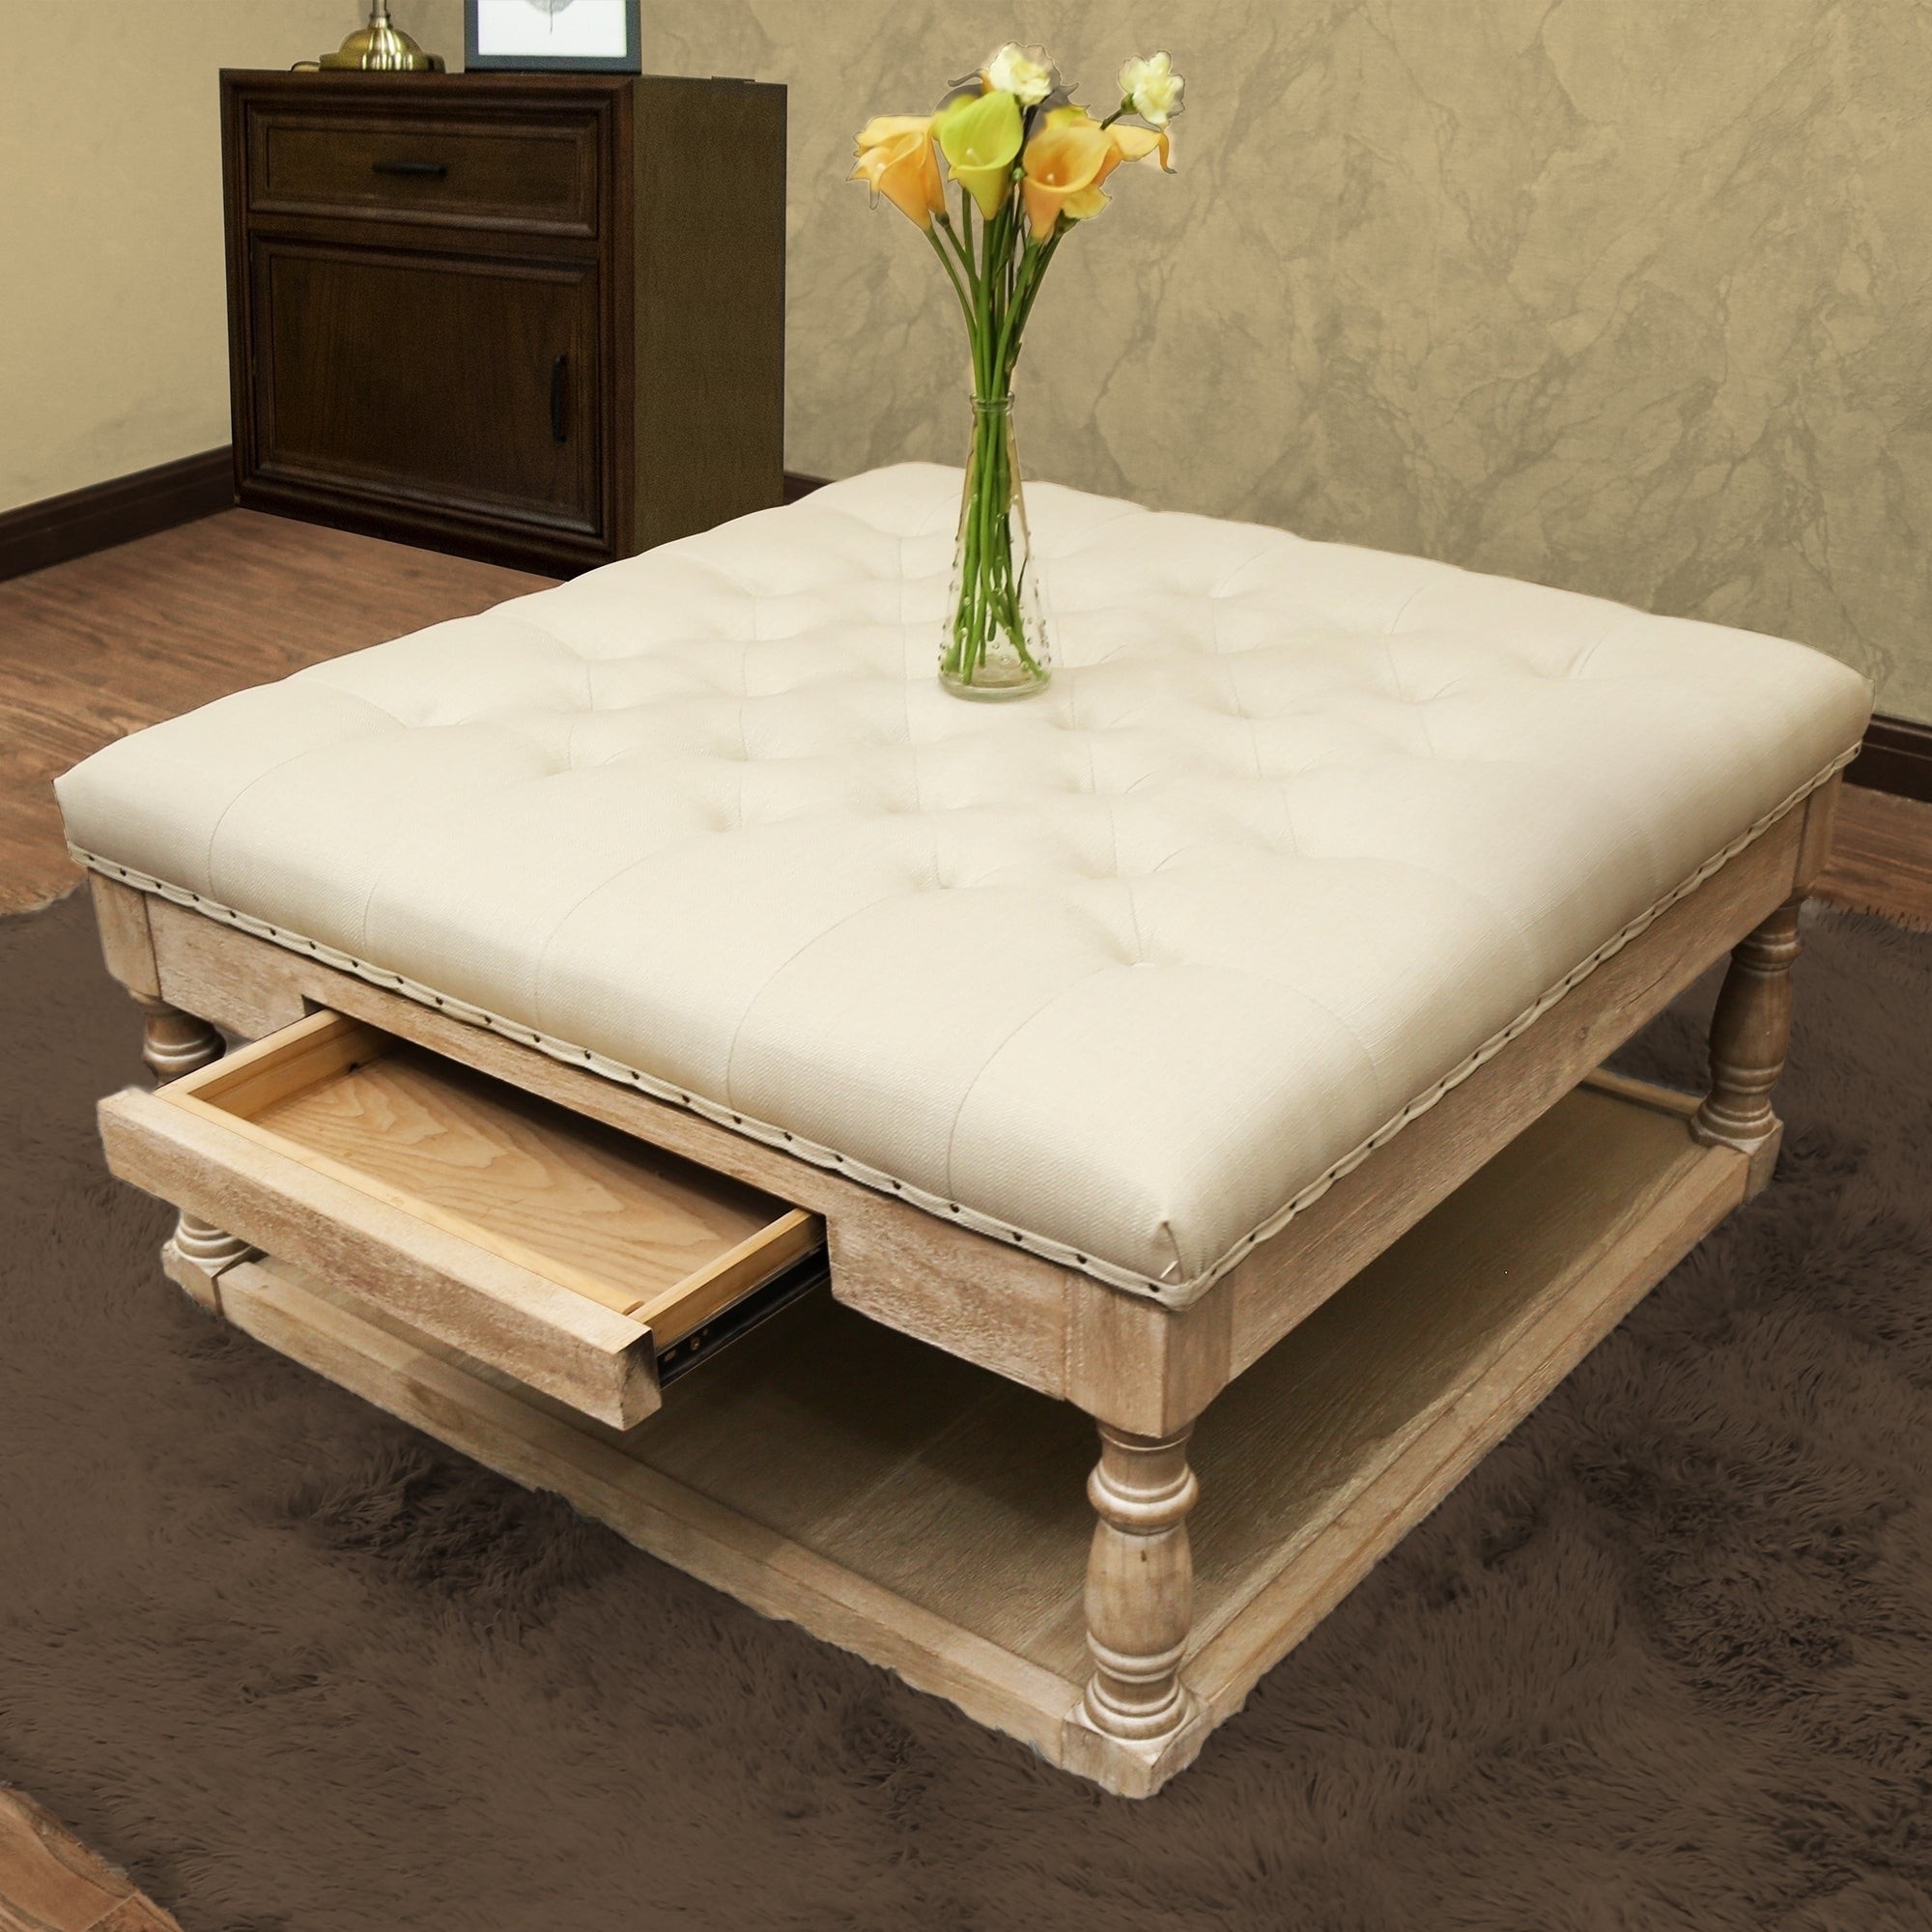 Suleiman tufted padded cocktail ottoman with shelf and